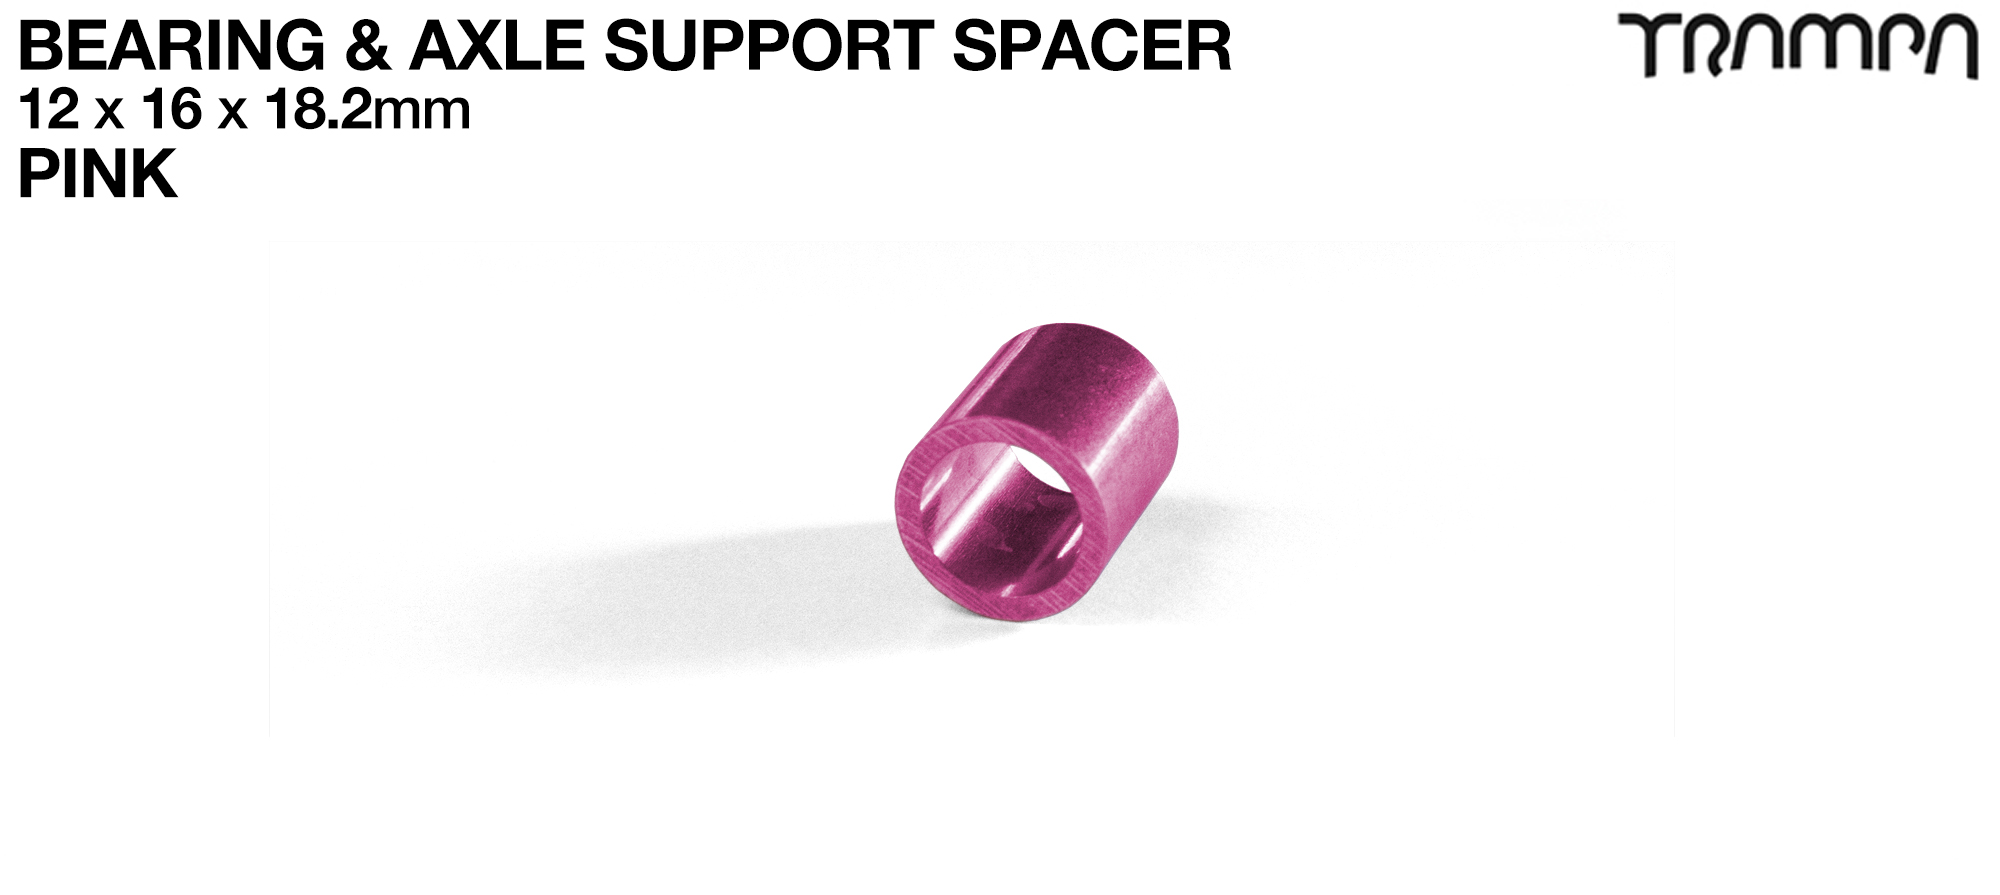 Wheel Support Axle Spacers - PINK 